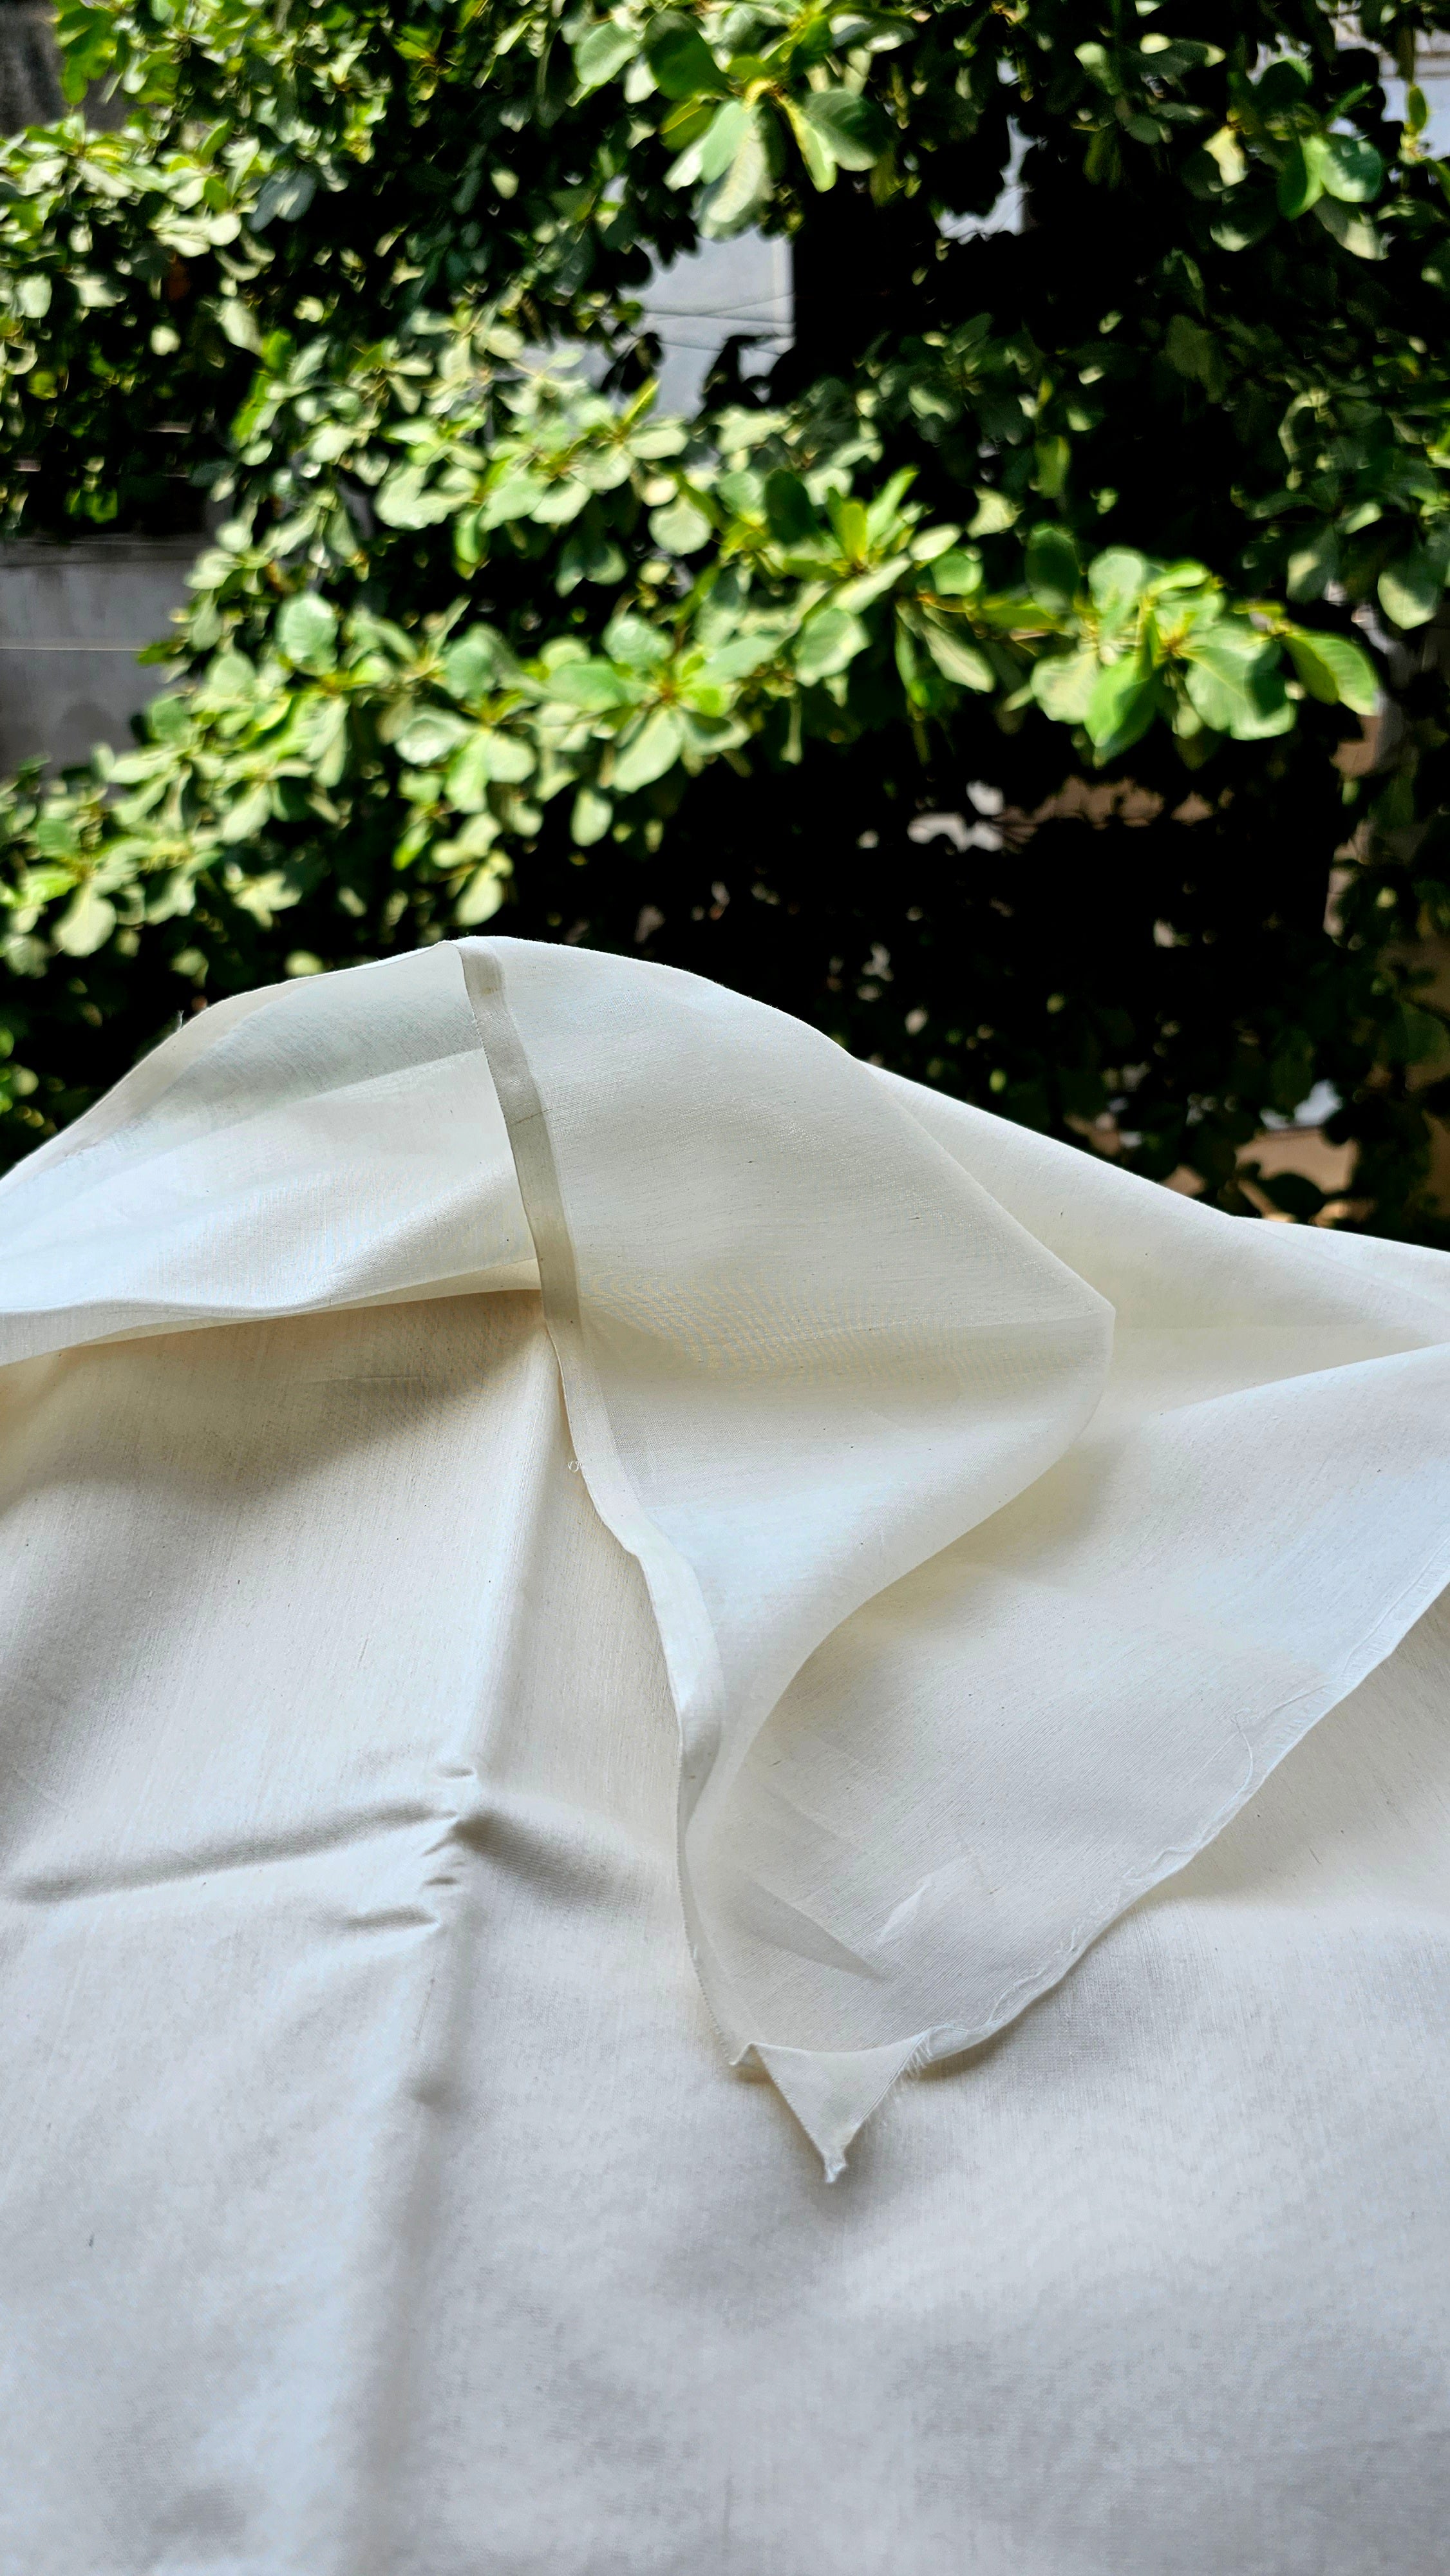 2/120 Count Cotton  Off White and Dyeable Silk/Cotton running Fabrics. 